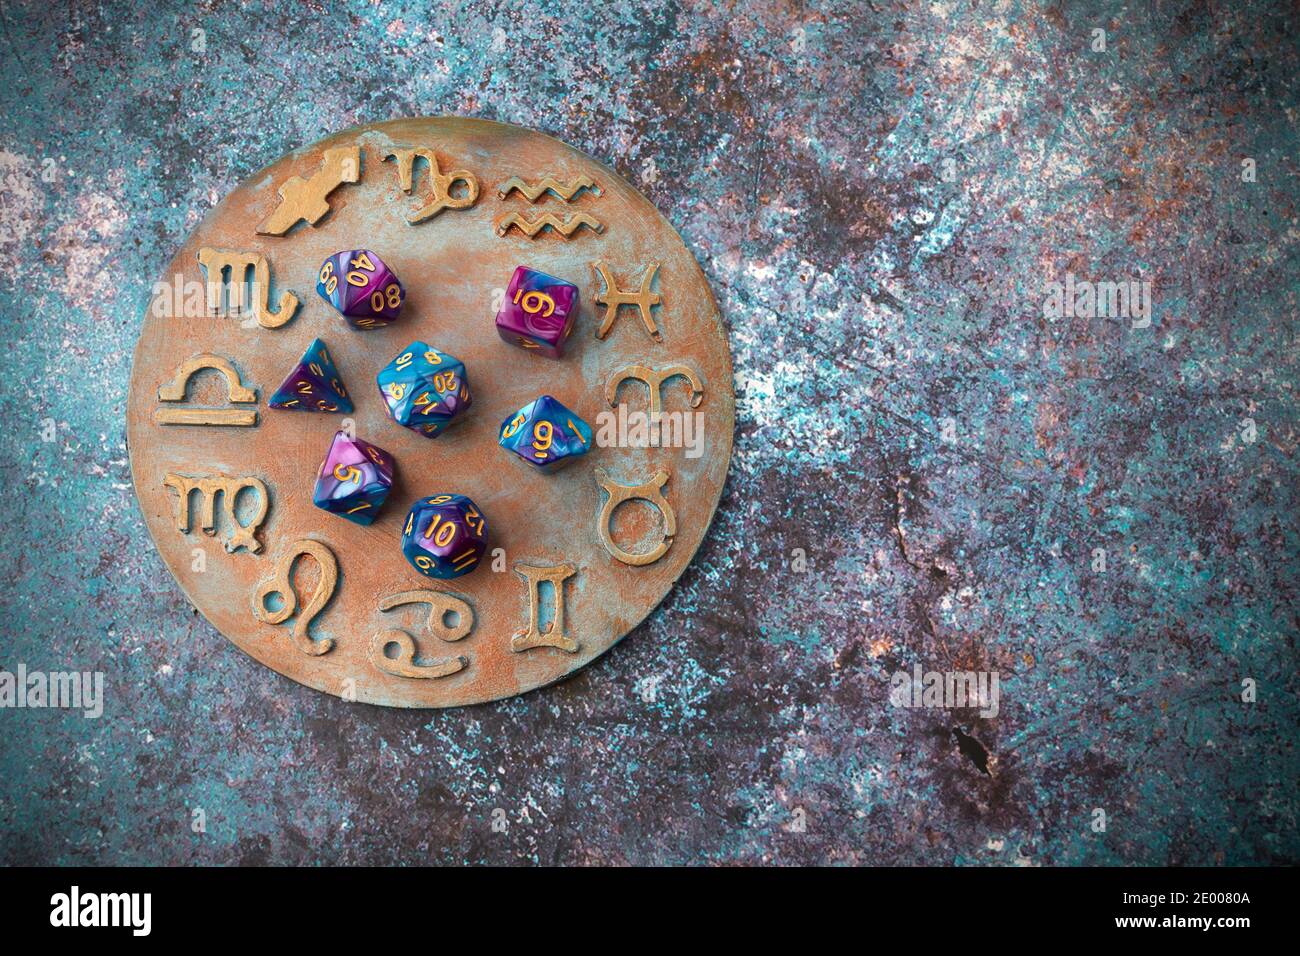 Horoscope circle with divination dice. Fortune telling and astrology predictions. Stock Photo